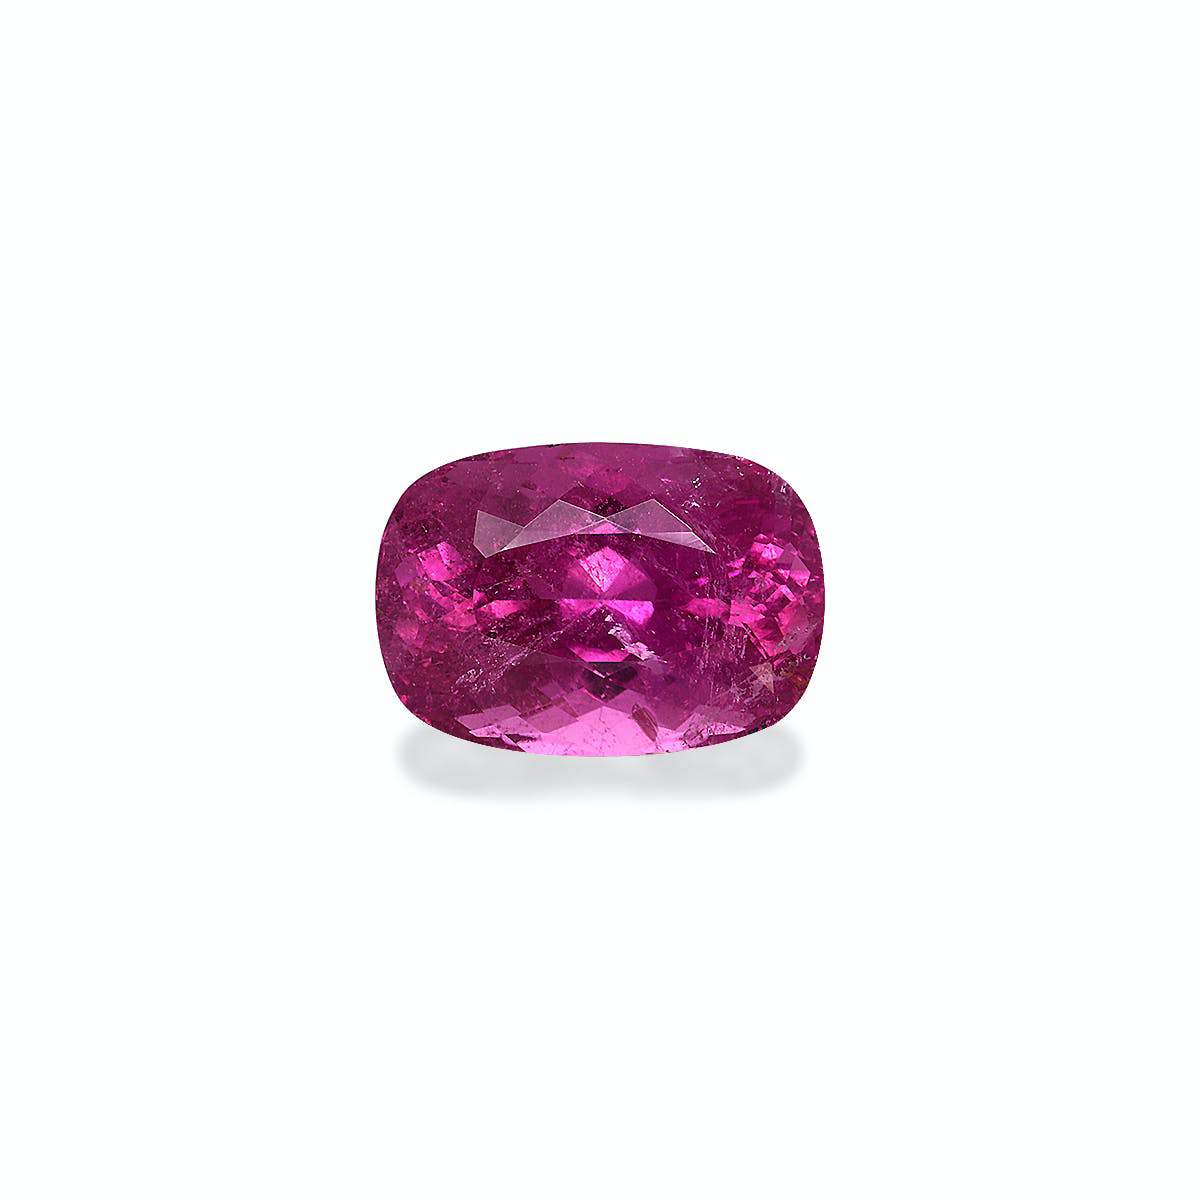 Picture of Flower Pink Rubellite Tourmaline 9.35ct (RL0751)